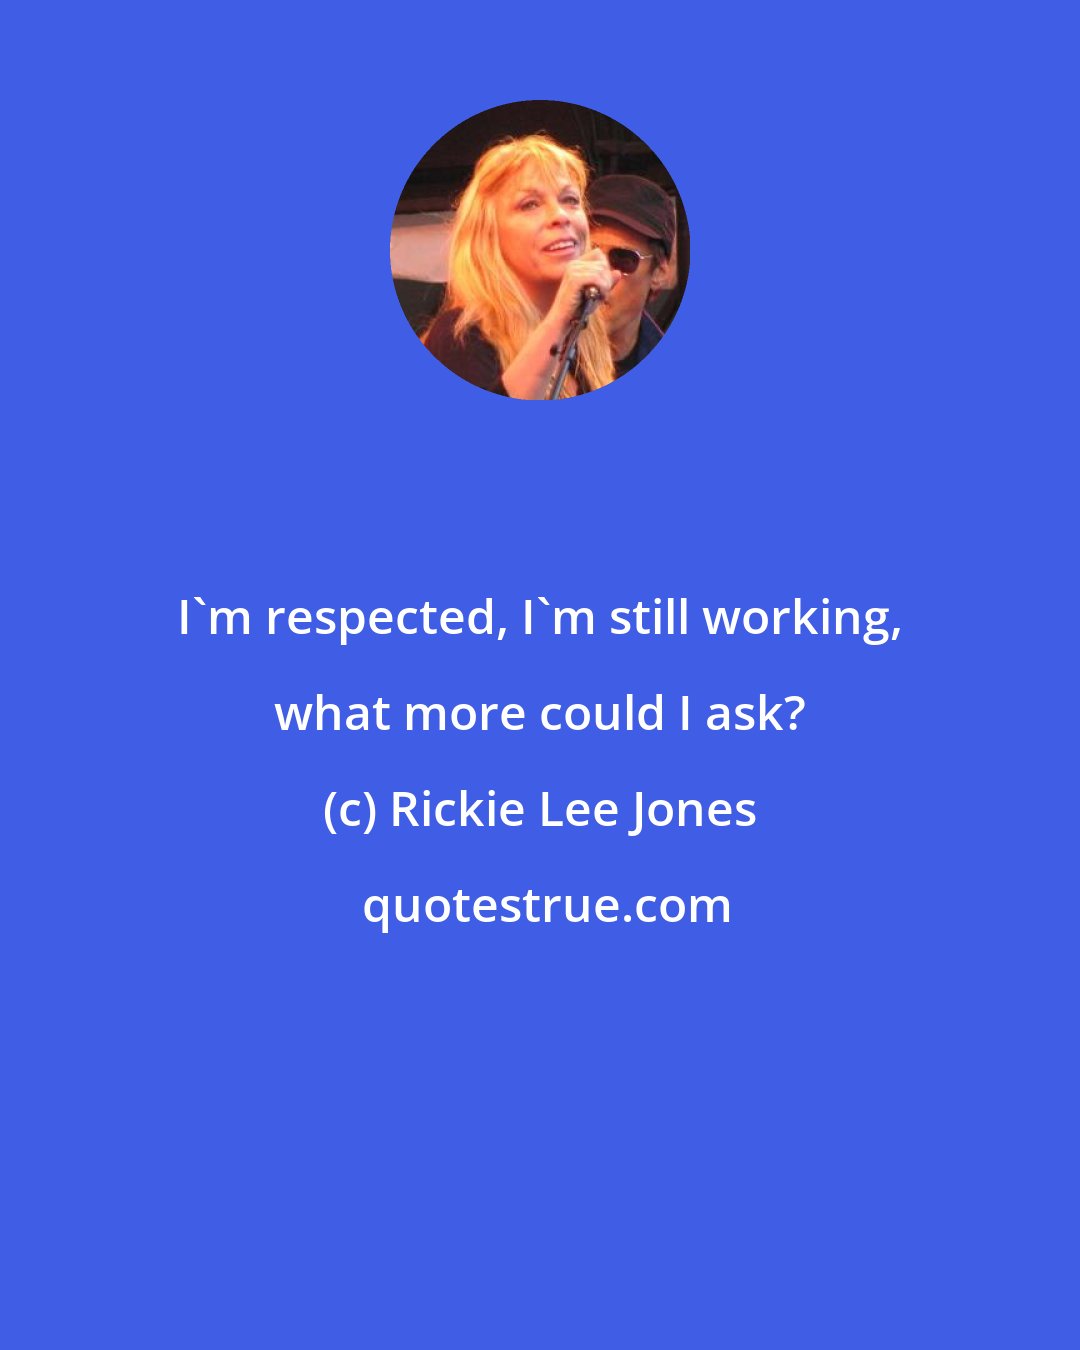 Rickie Lee Jones: I'm respected, I'm still working, what more could I ask?